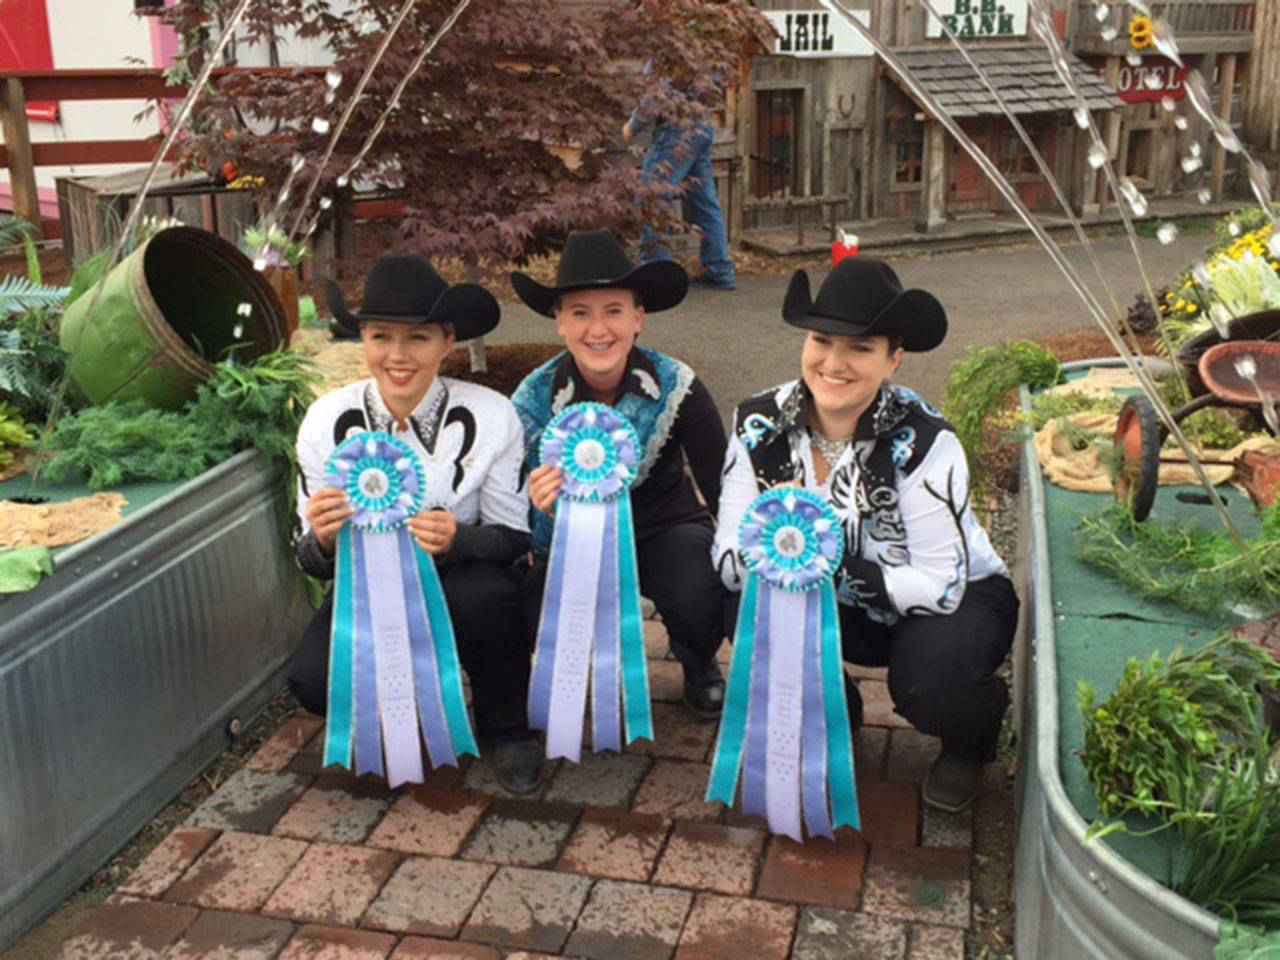 Senior division 4-H performance horse riders Emily Menshew, Kaylie Graf and Holly Cozzolino, from left, are all smiles for attaining all blue ribbons at the Western Washington State Fair in Puyallup from Sept. 7-11. They competed in showmanship, hunt seat, stock seat, disciplined rail, bareback and trail. (Russelle Graf)